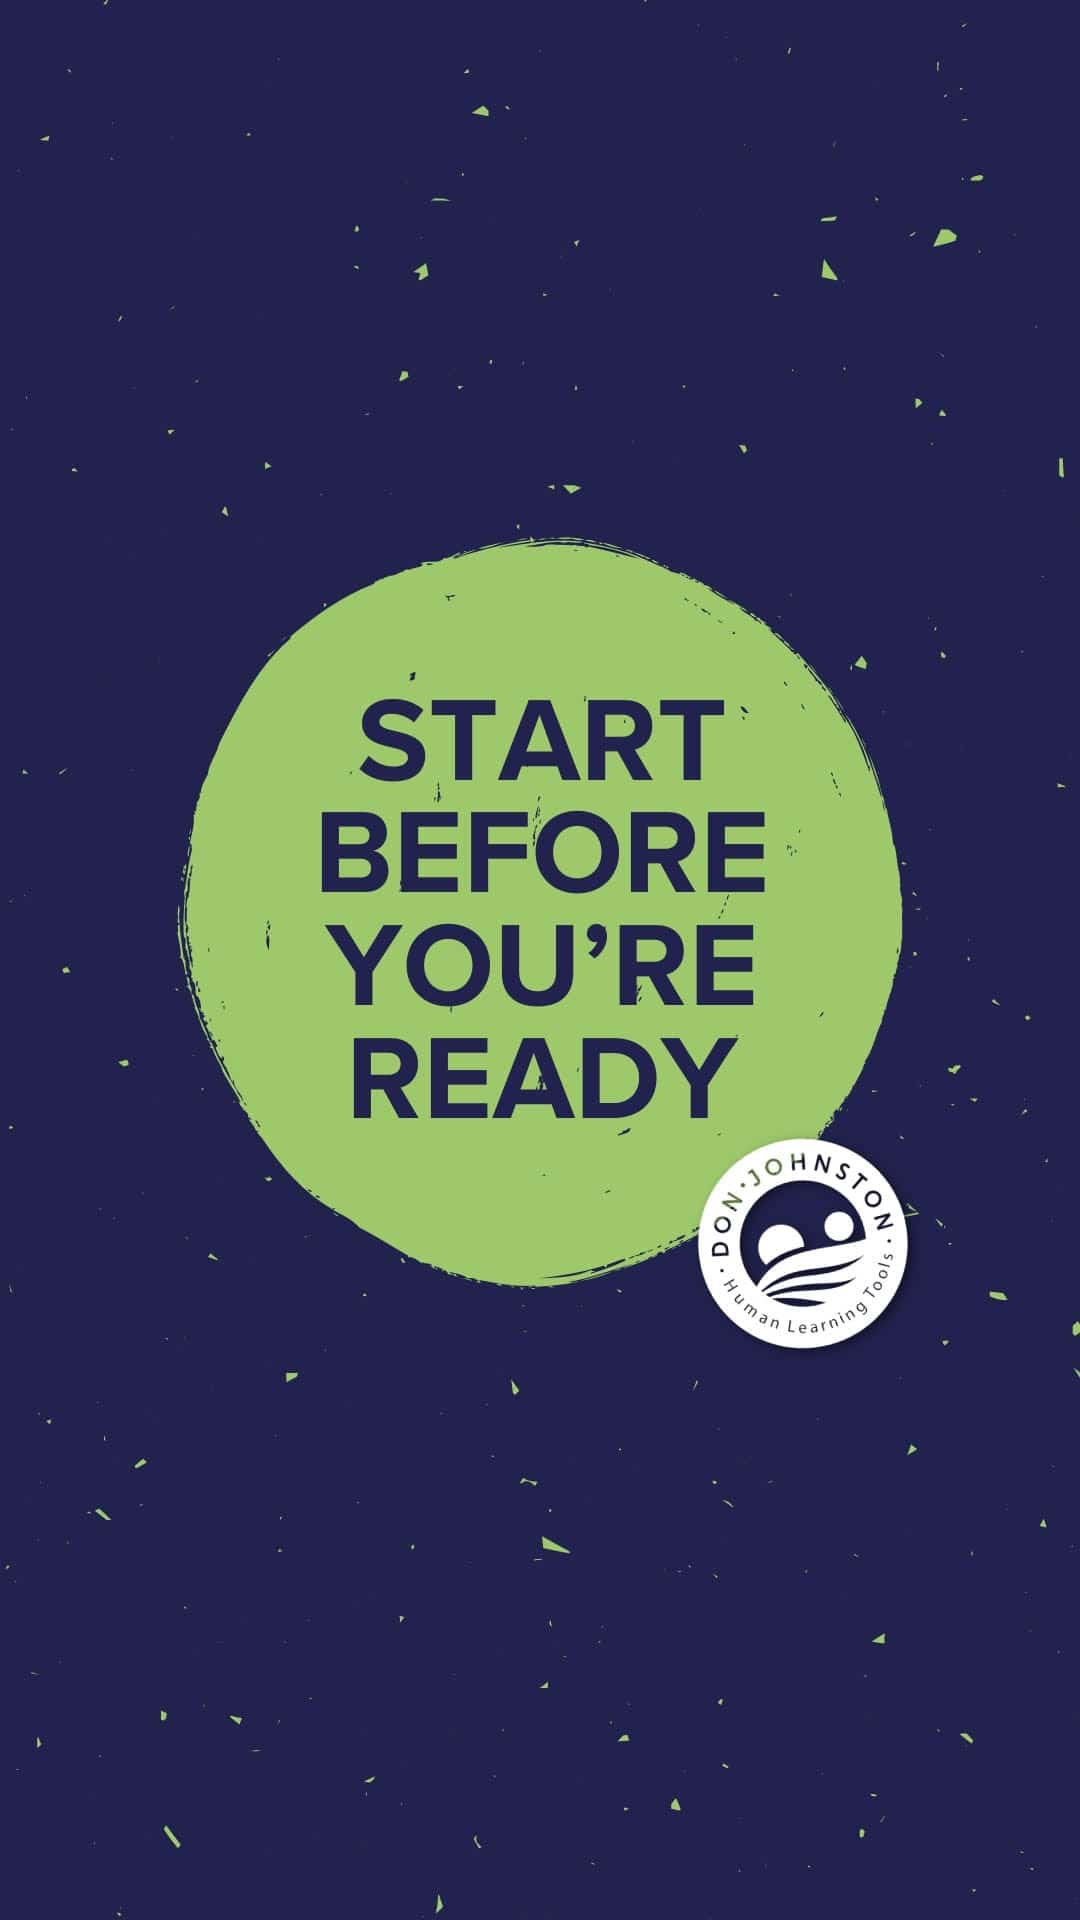 Start before your ready wallpaper